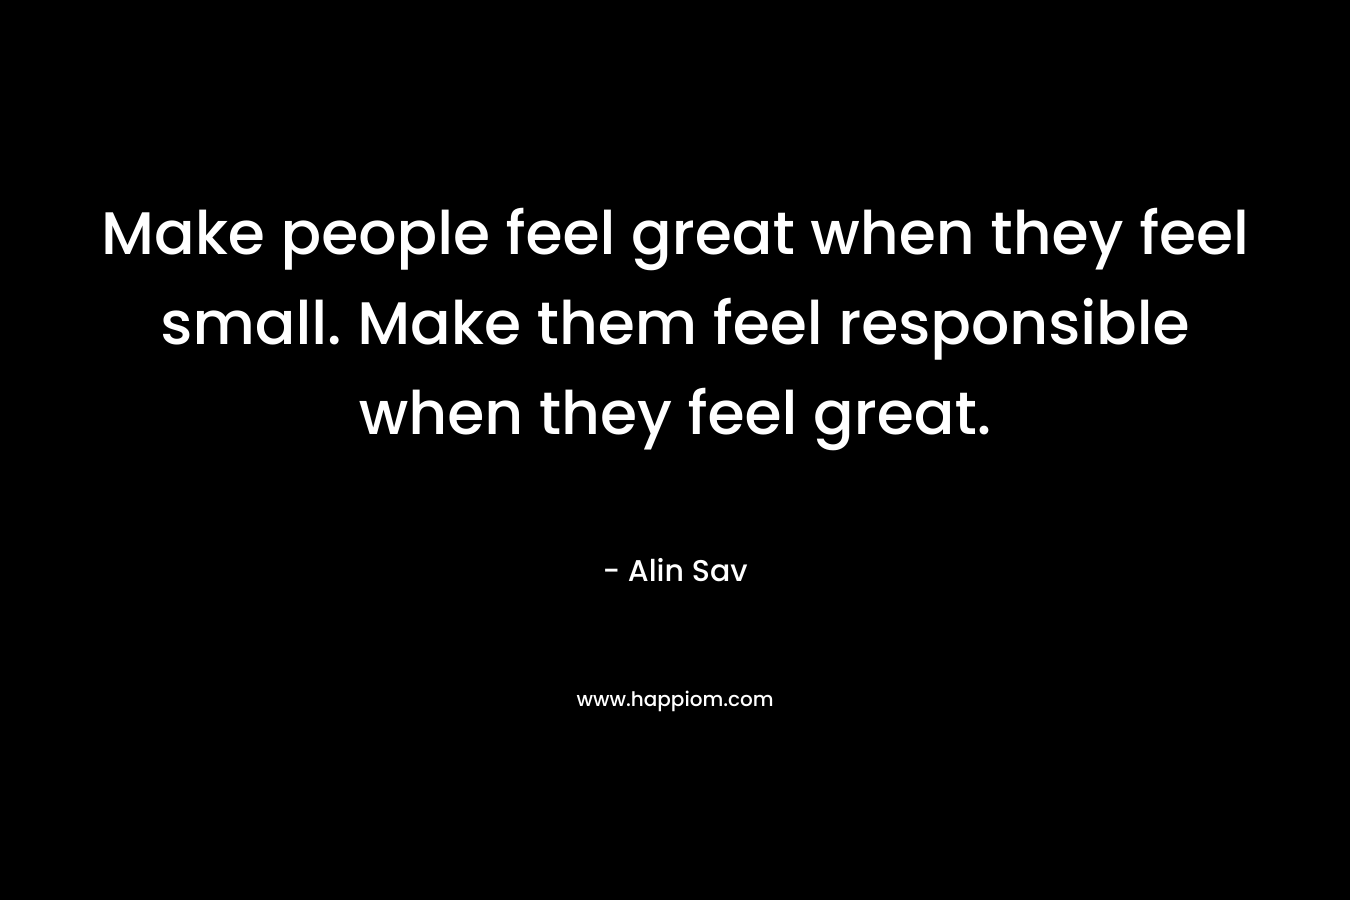 Make people feel great when they feel small. Make them feel responsible when they feel great.